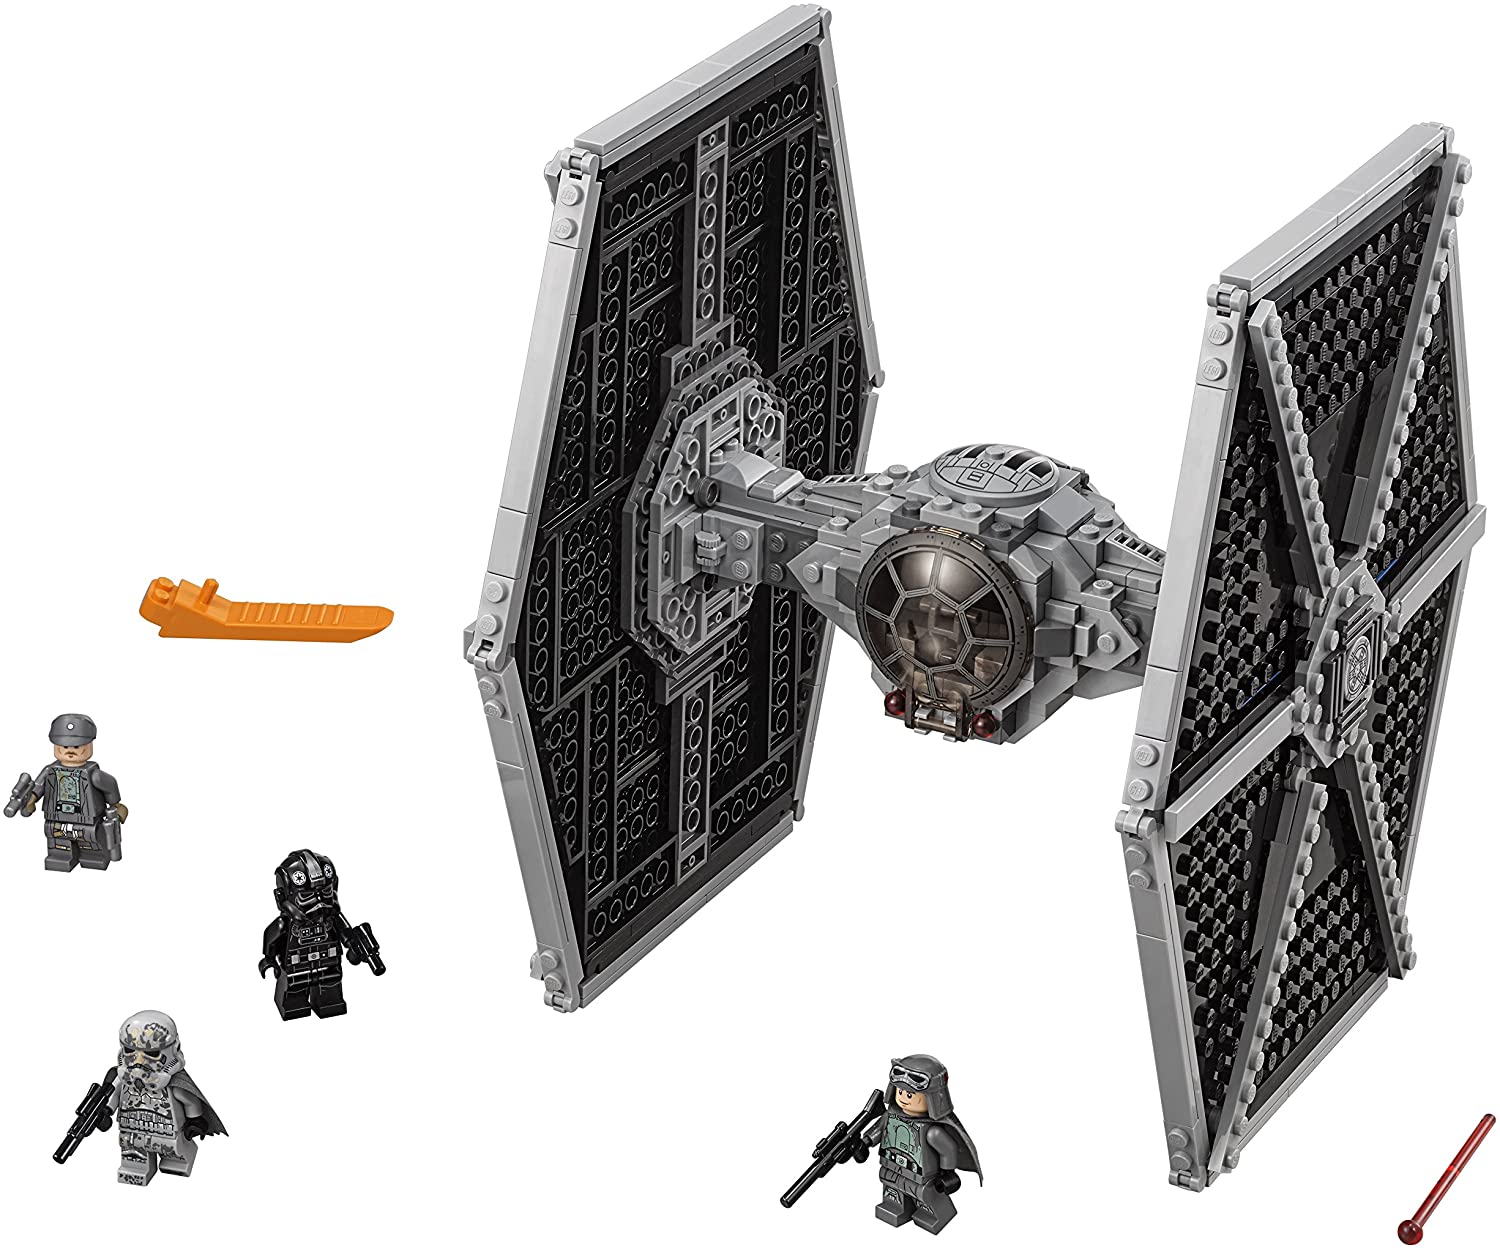 LEGO Ages 9 To 14 Star Wars Imperial Tie Fighter Kit Of 519 Piece Sets